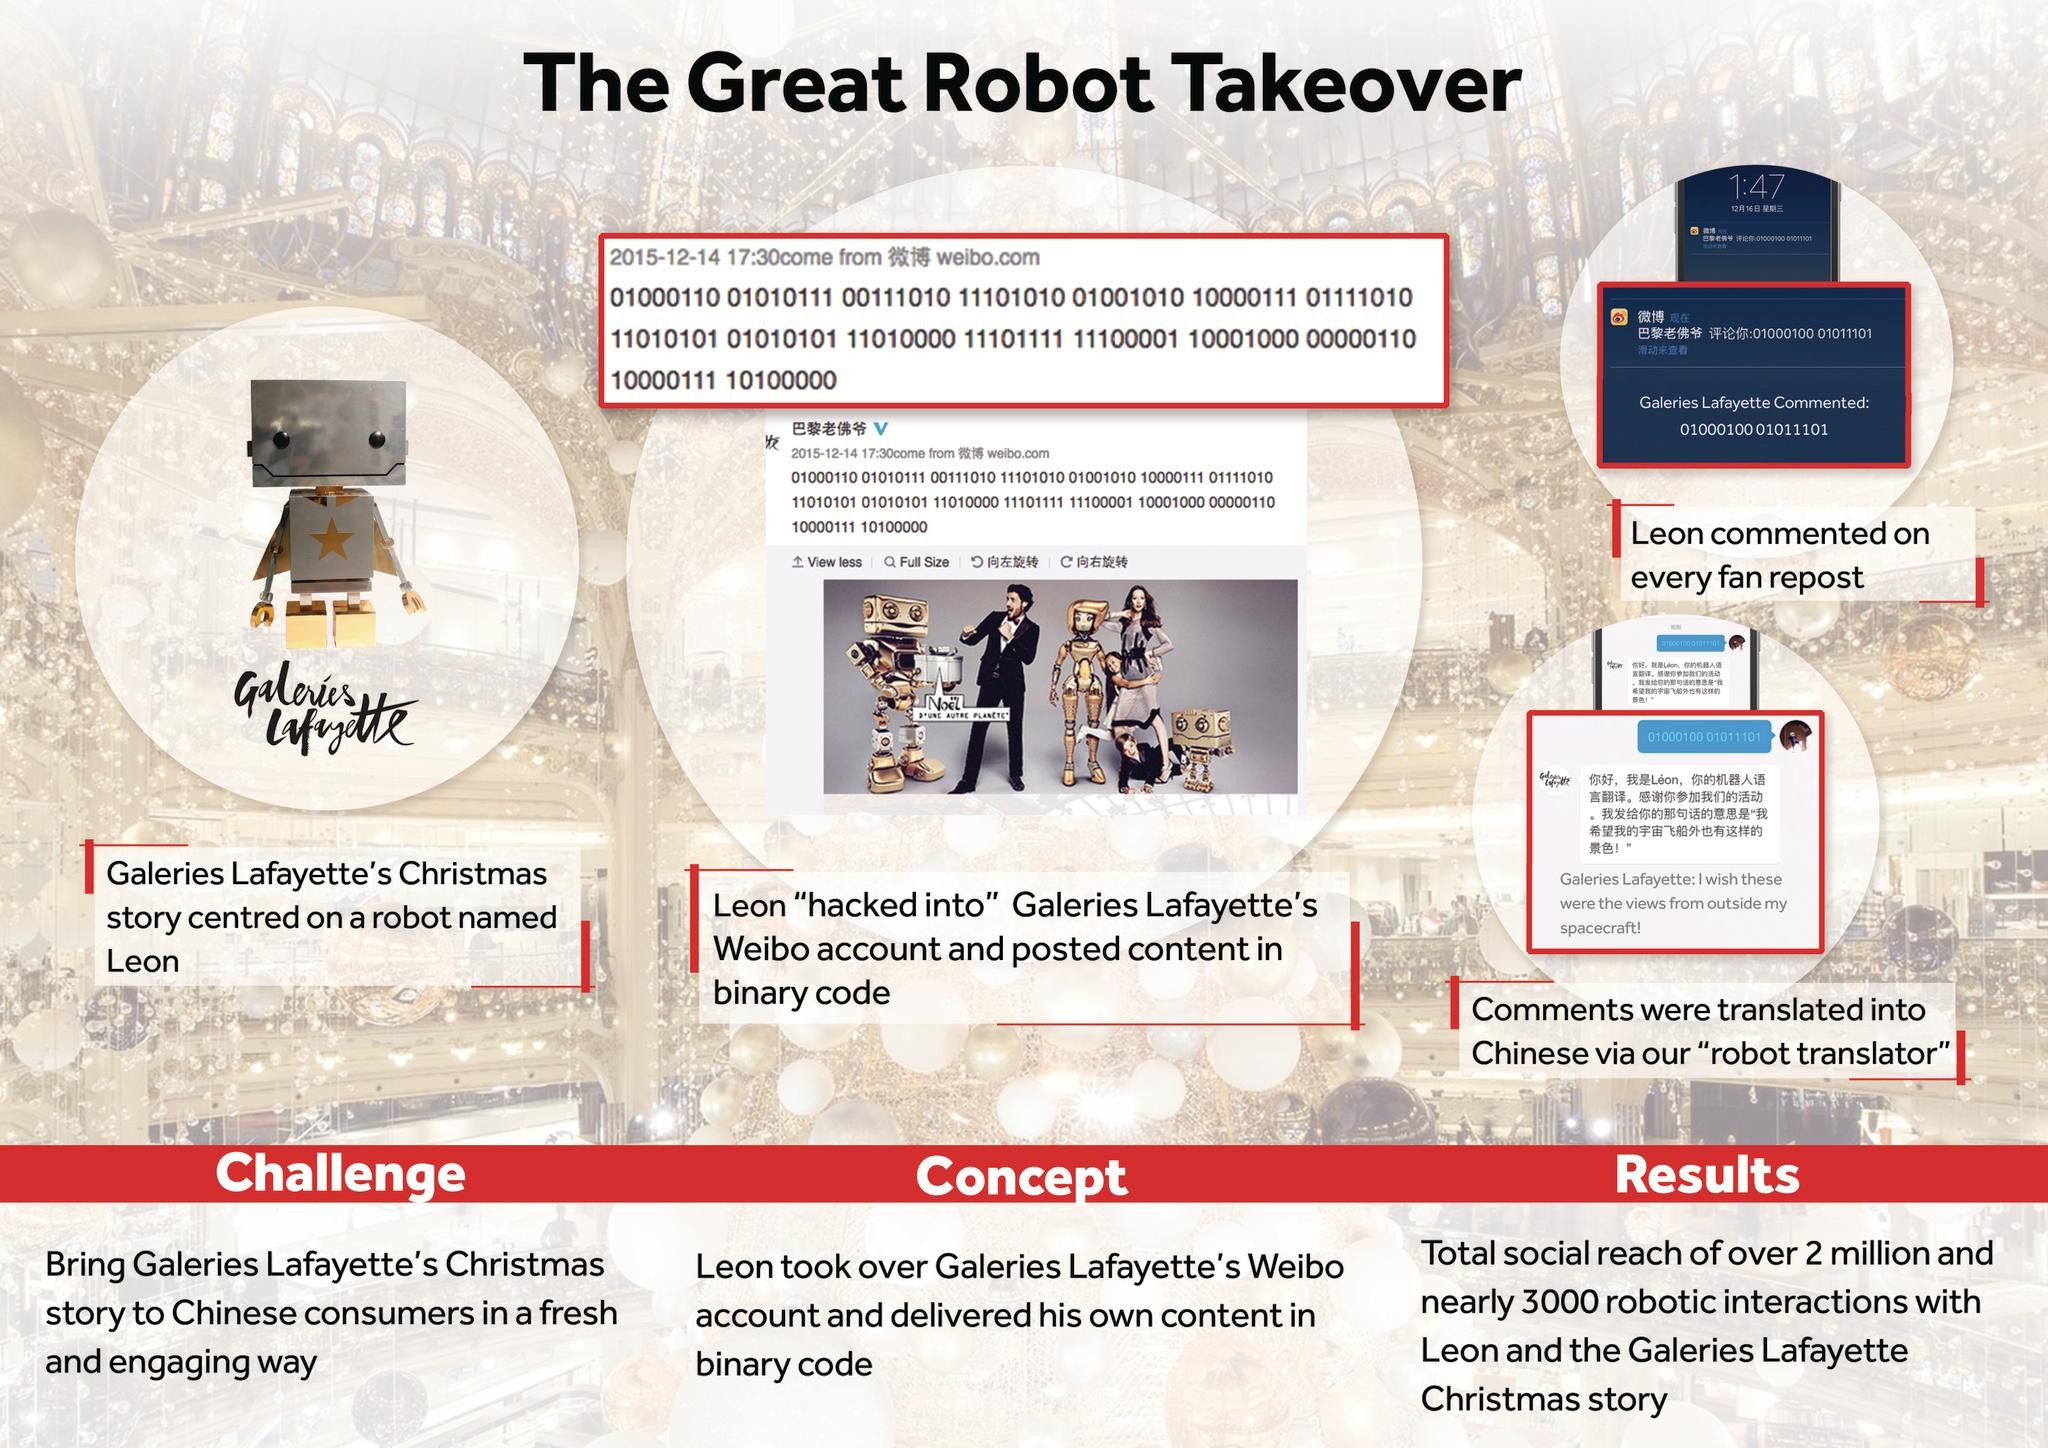 The Great Robot Takeover